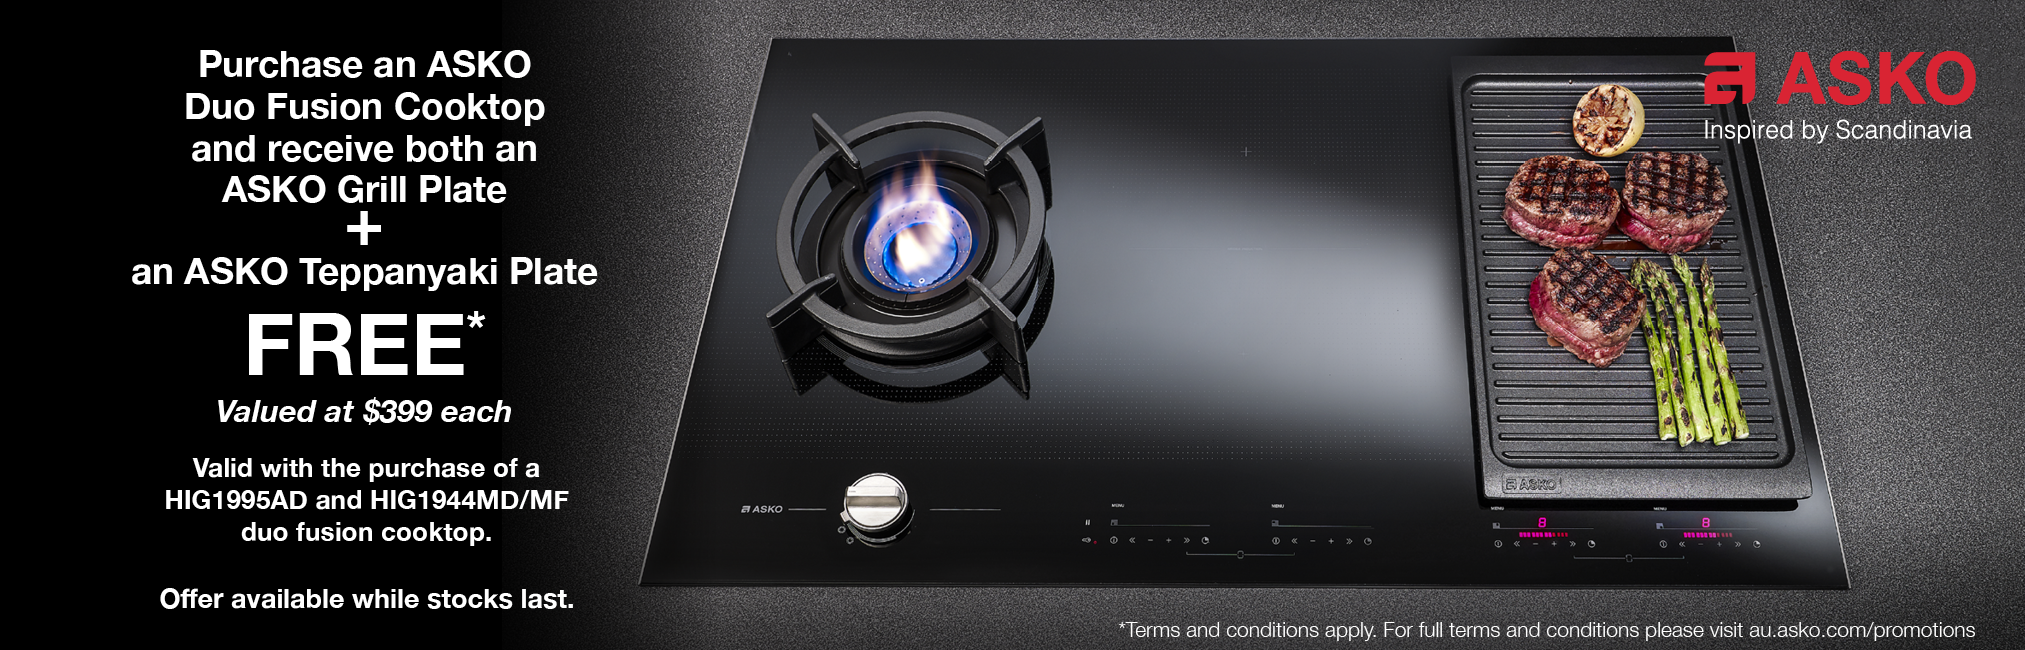 Purchase an ASKO Duo Fusion Cooktop & Receive Bonus Grill Plate & Teppanyaki Plate Valued at $399* each